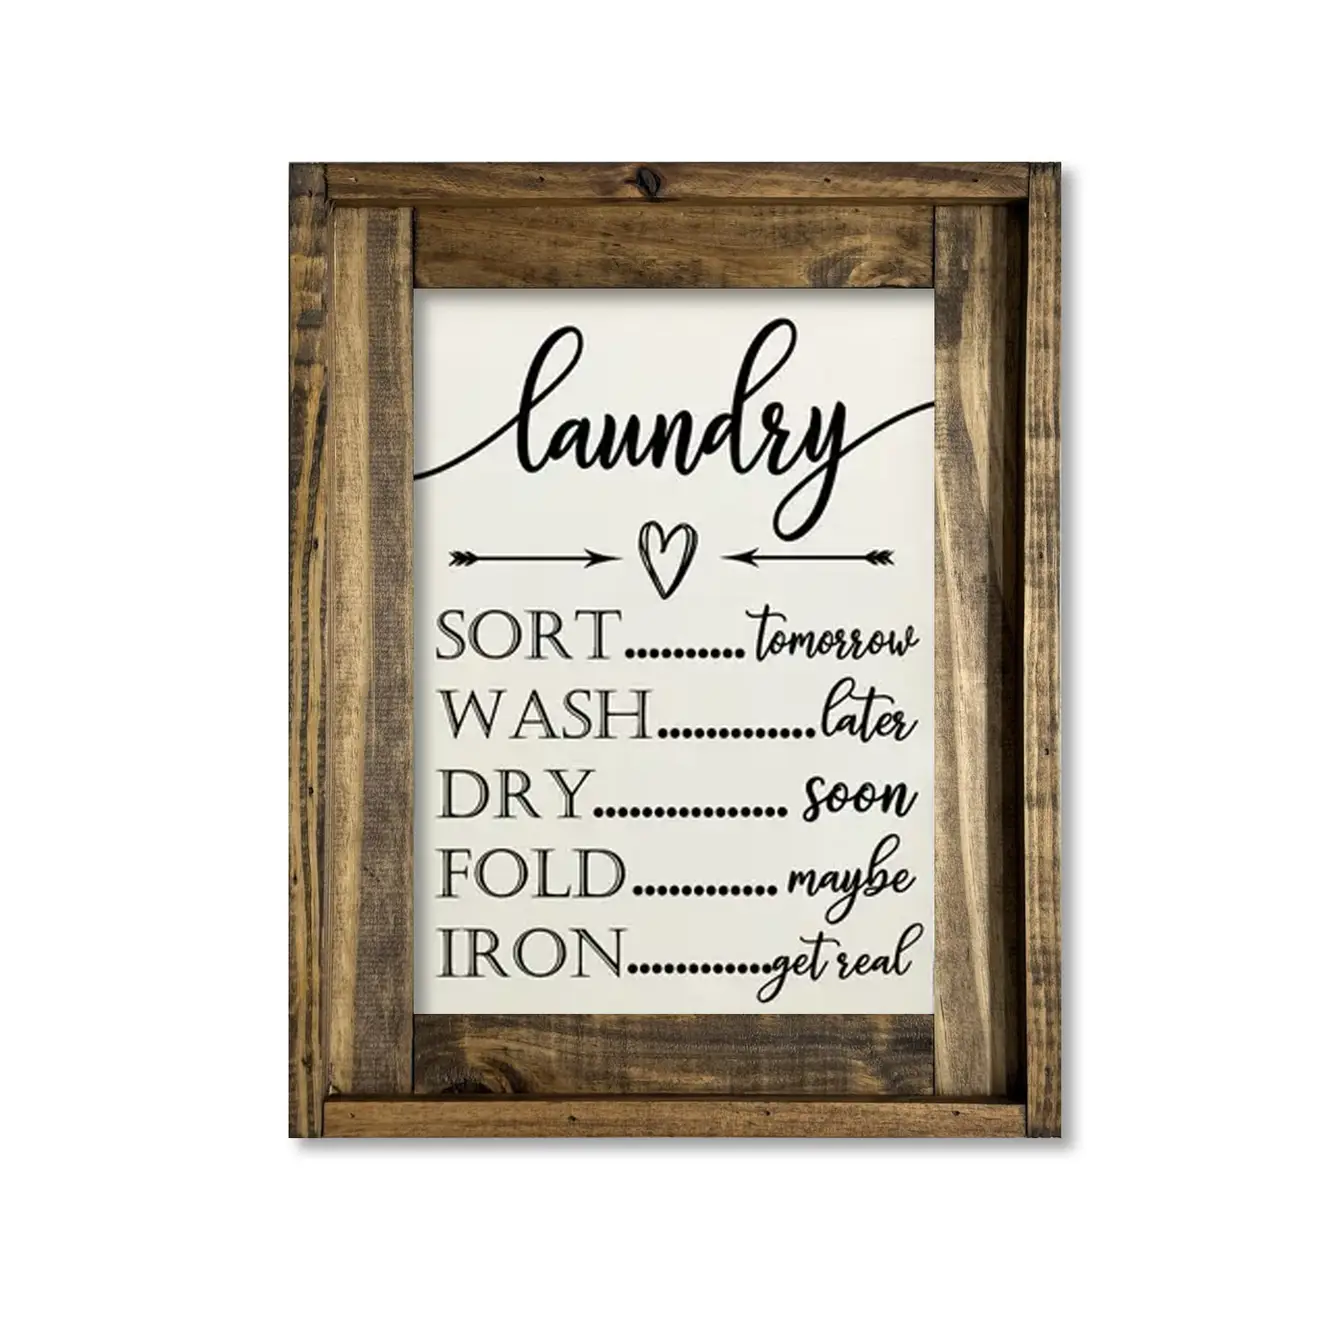 FRAMED CANVAS LAUNDRY SCHEDULE